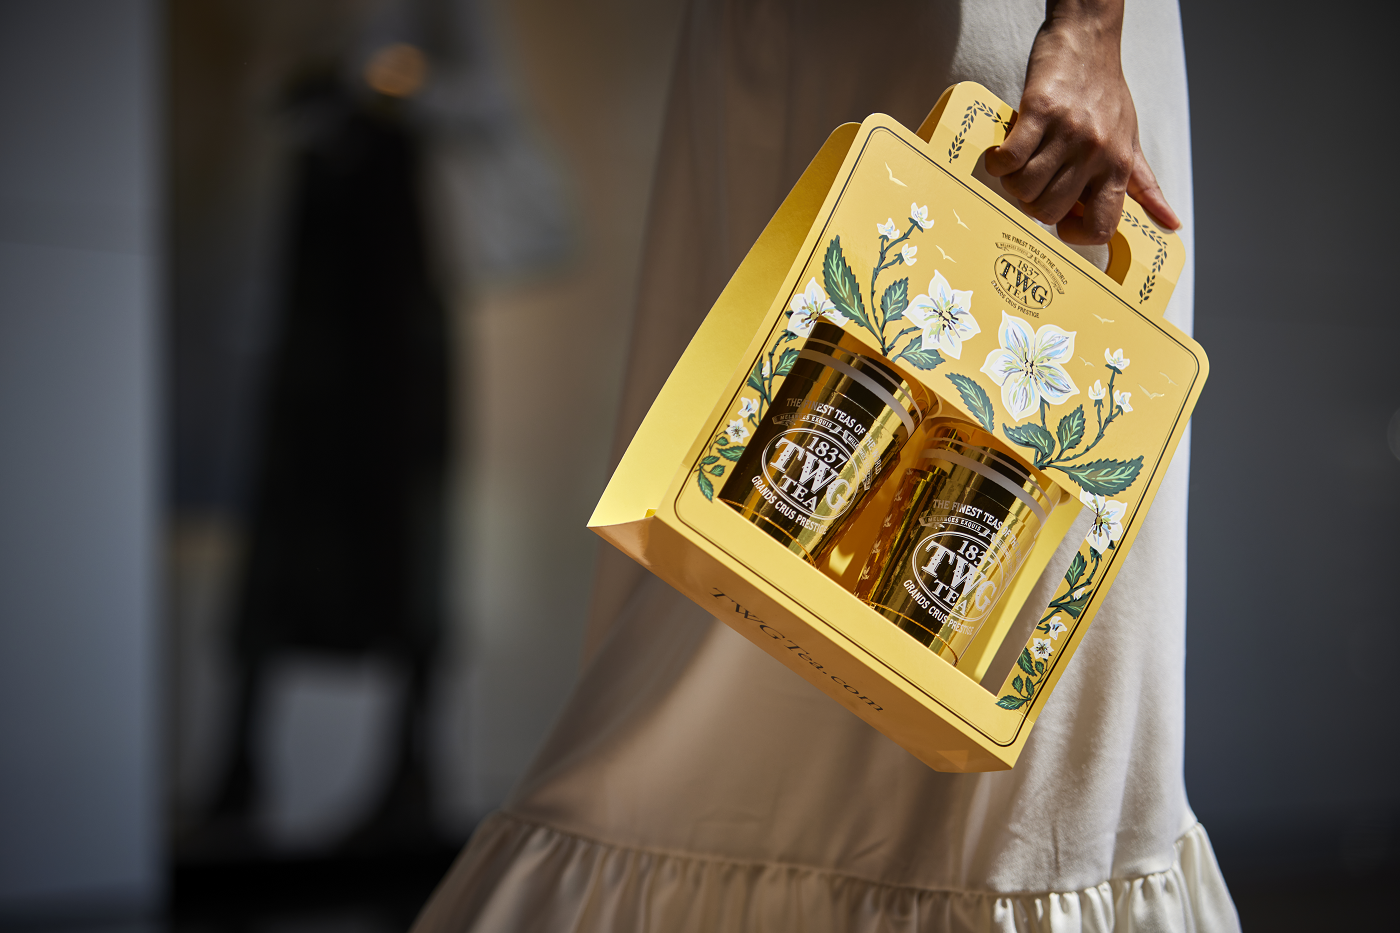 Now Infusing... Indonesia's first TWG Tea Takeaway concept in